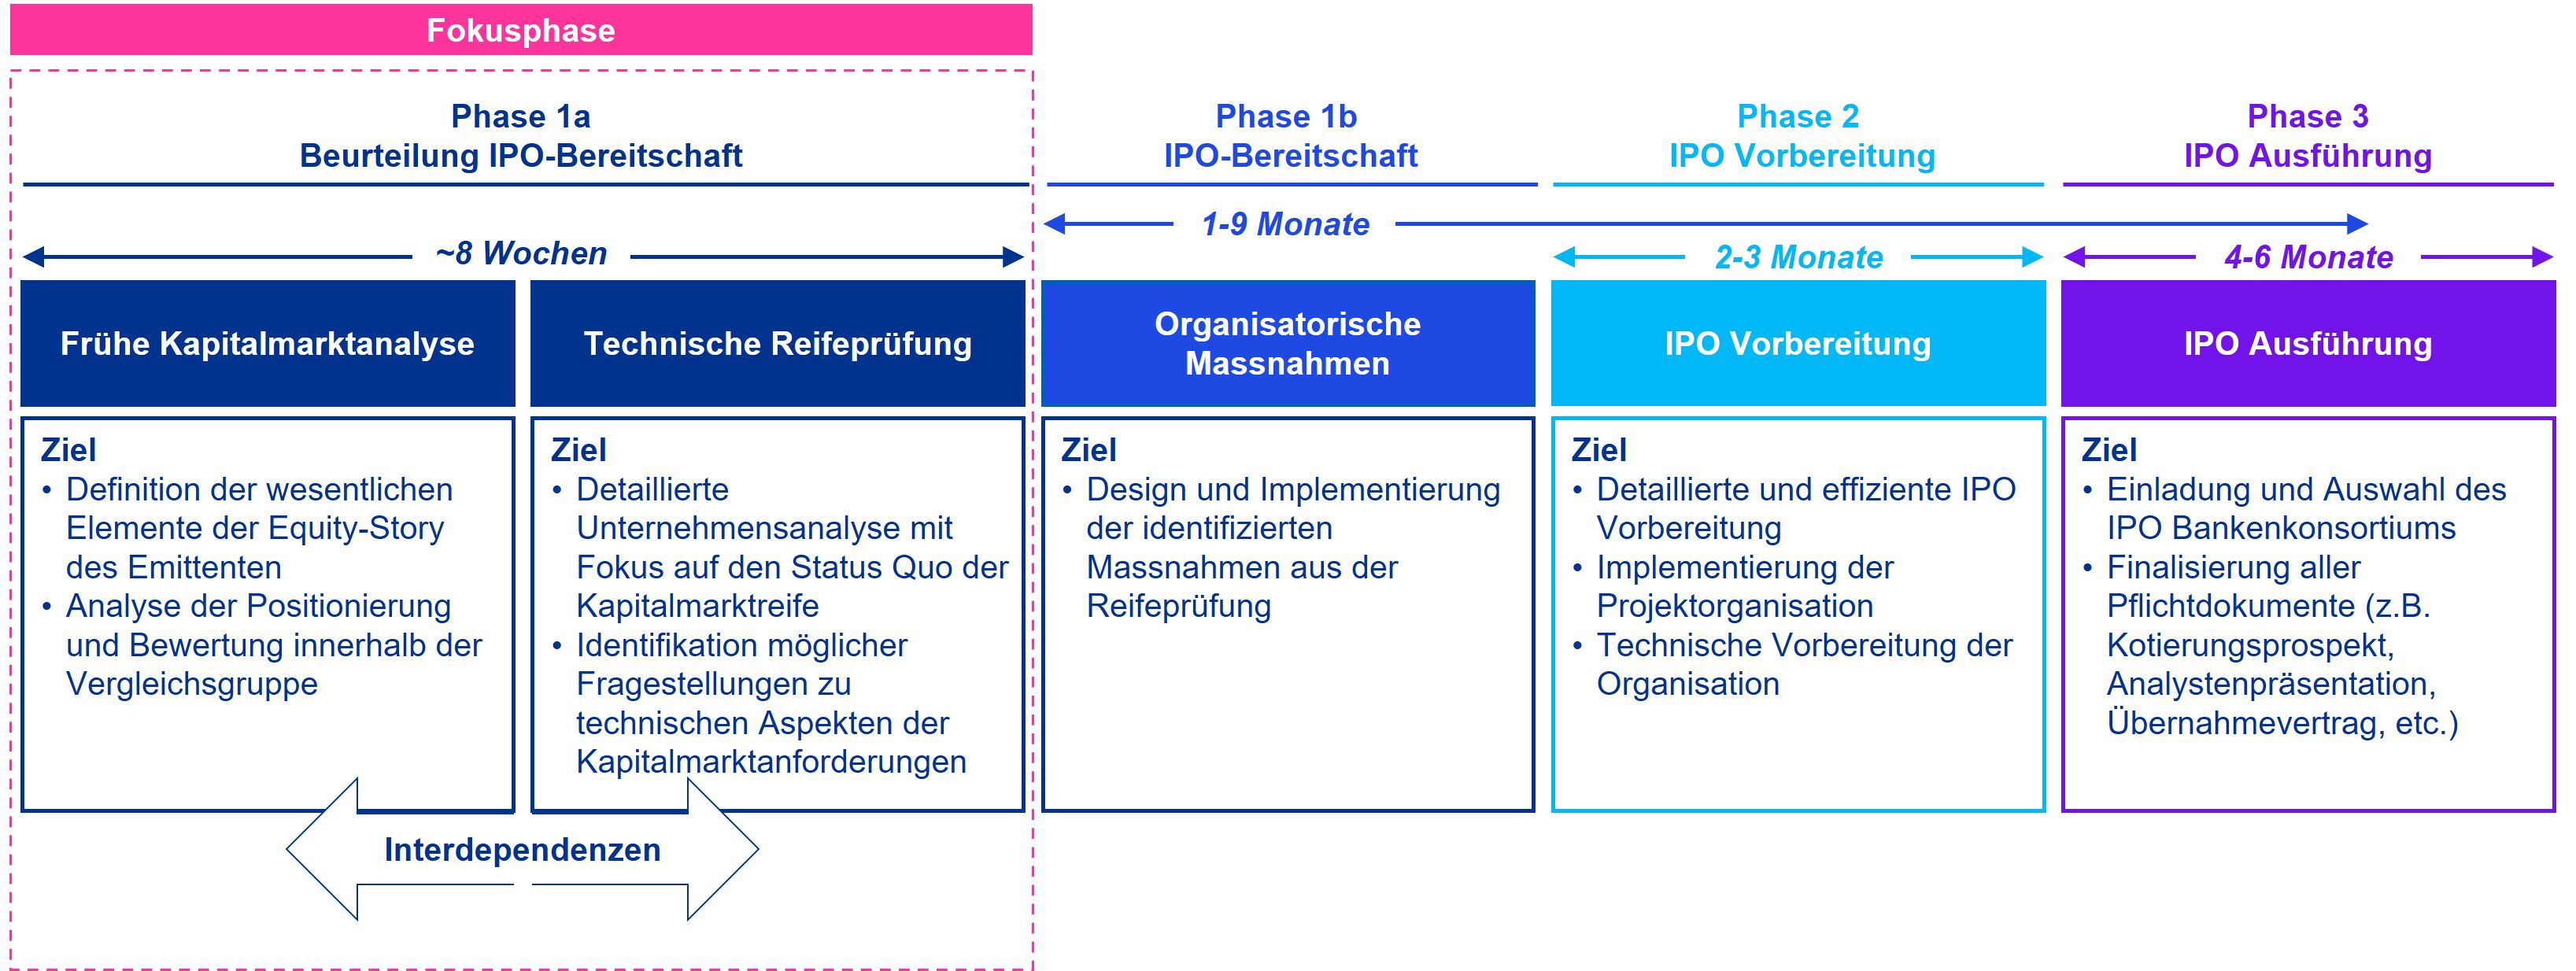 Typical phases of an IPO - KPMG IPO readiness assessment